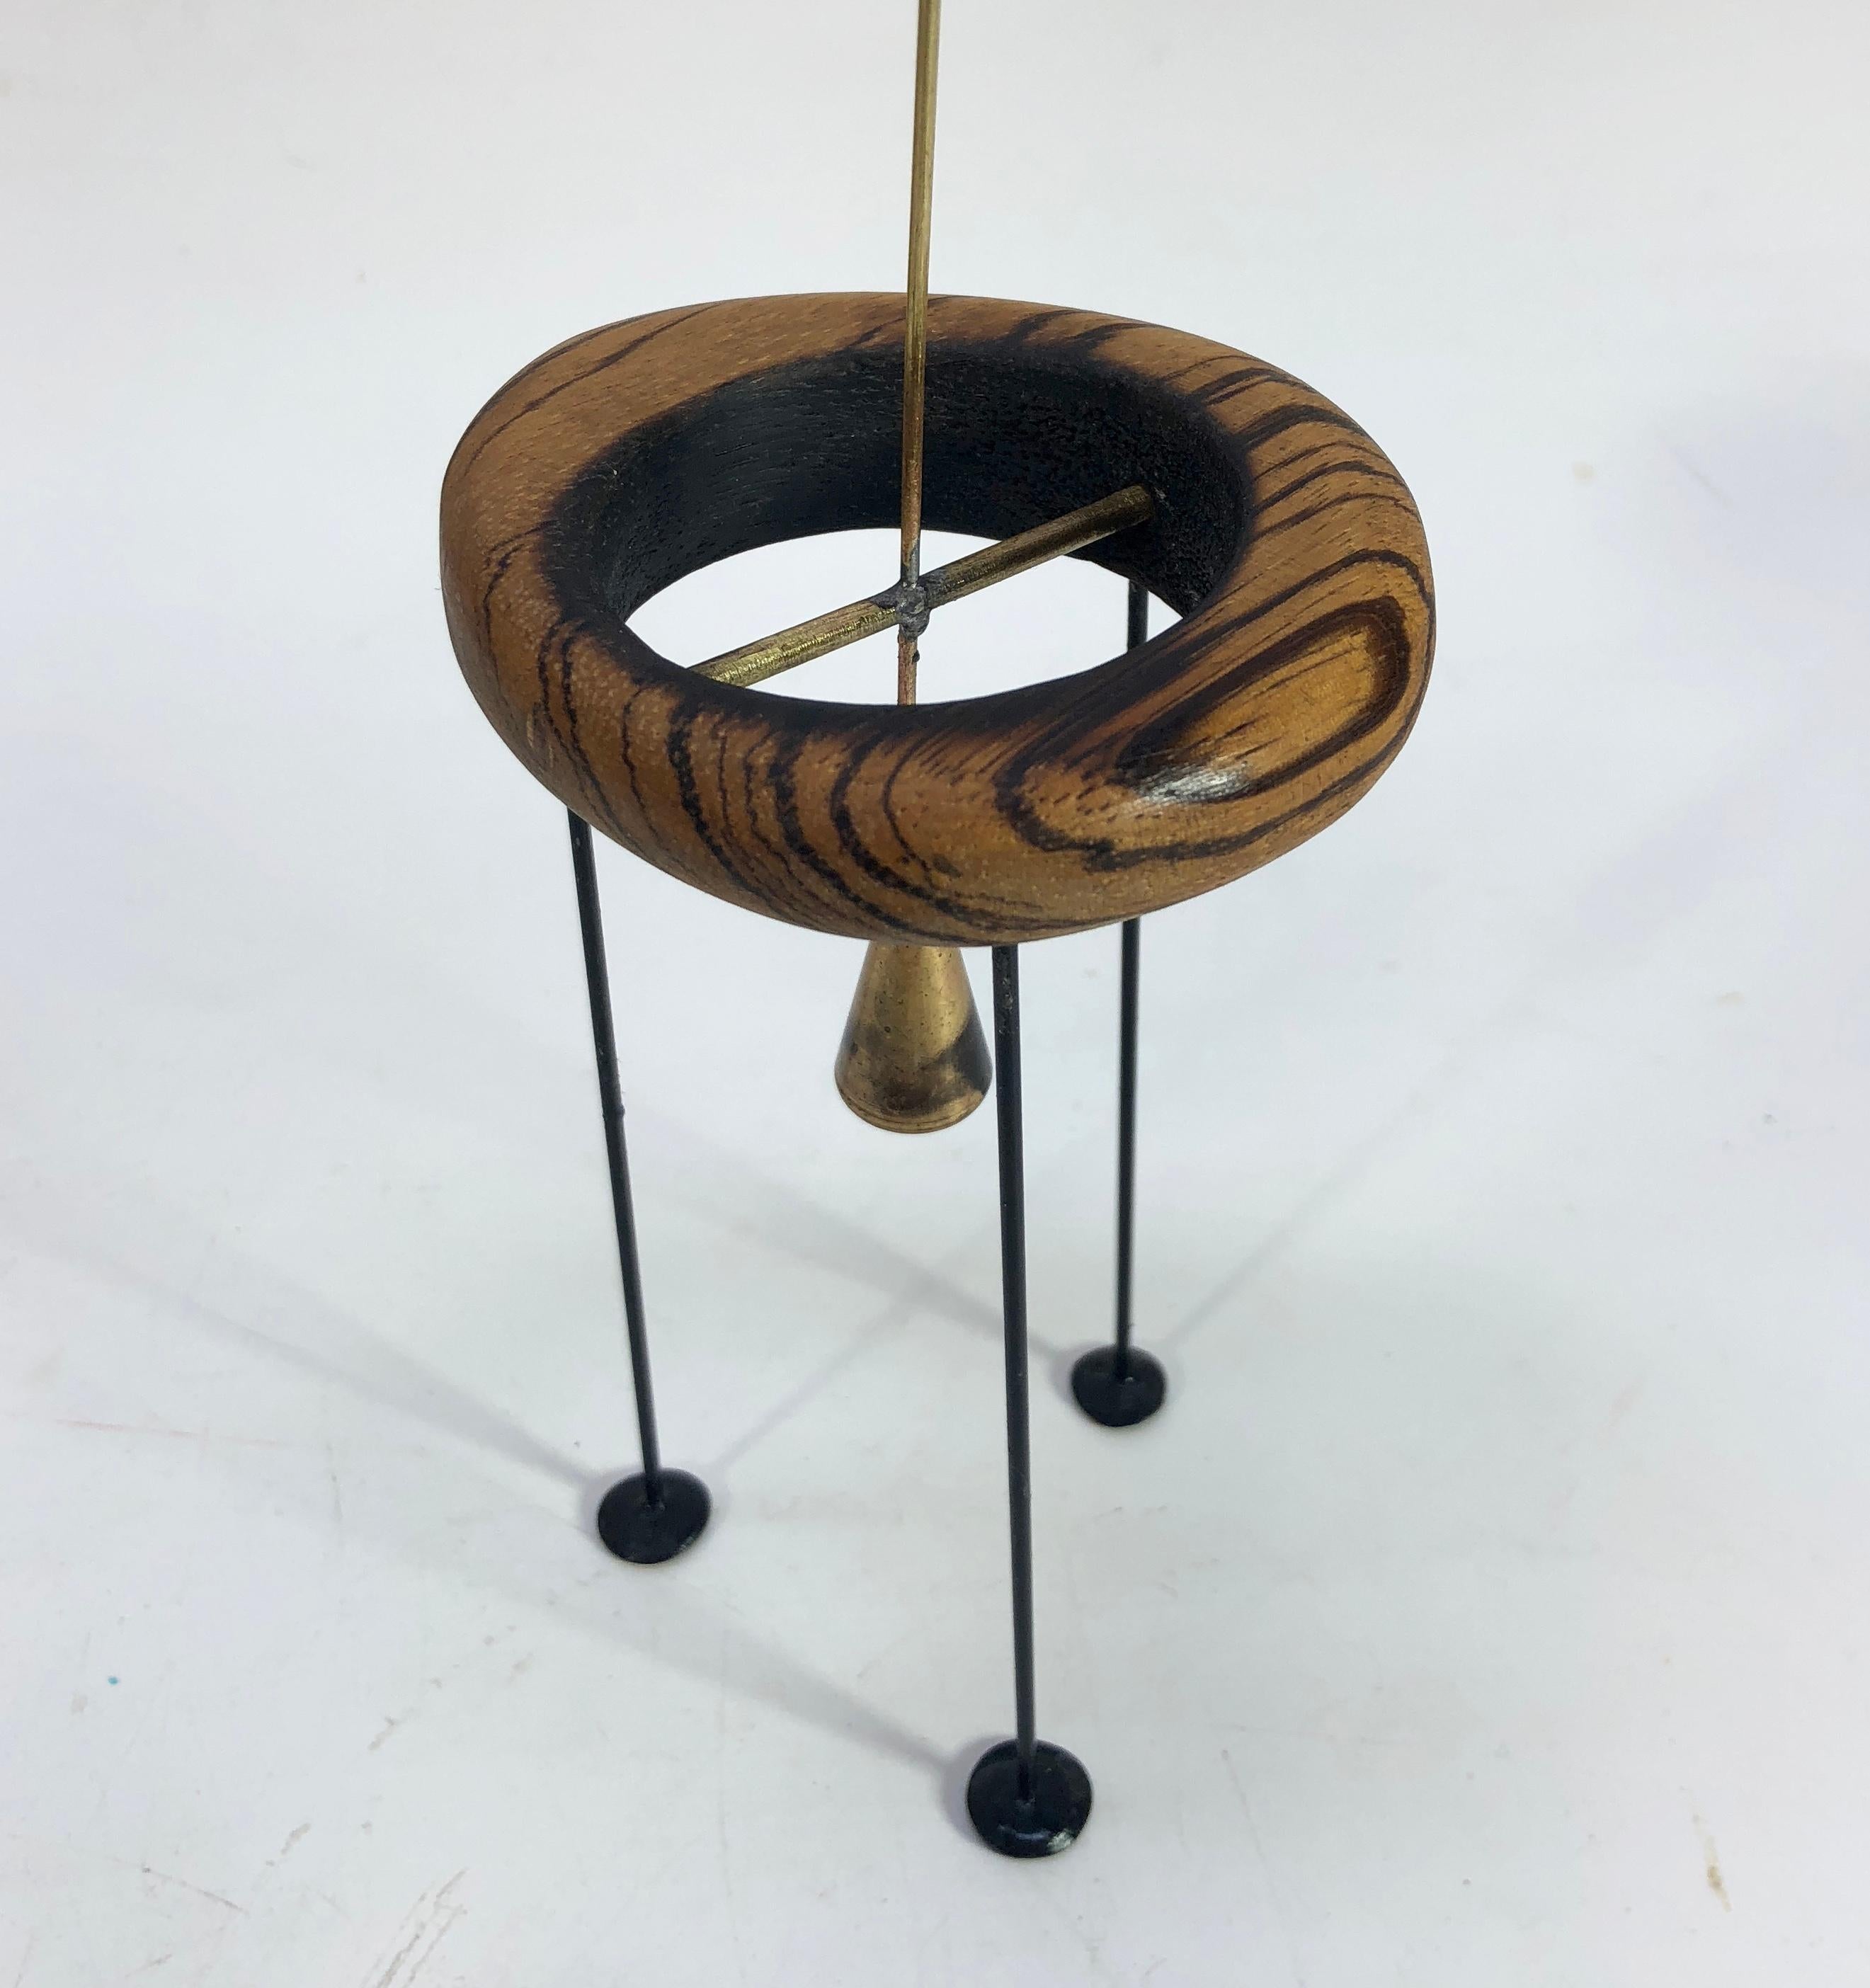 Adam Henderson's The Memory of Time abstract sculpture. A swinging weighted fulcrum suspended in a wood donut and supported by three pod feet.